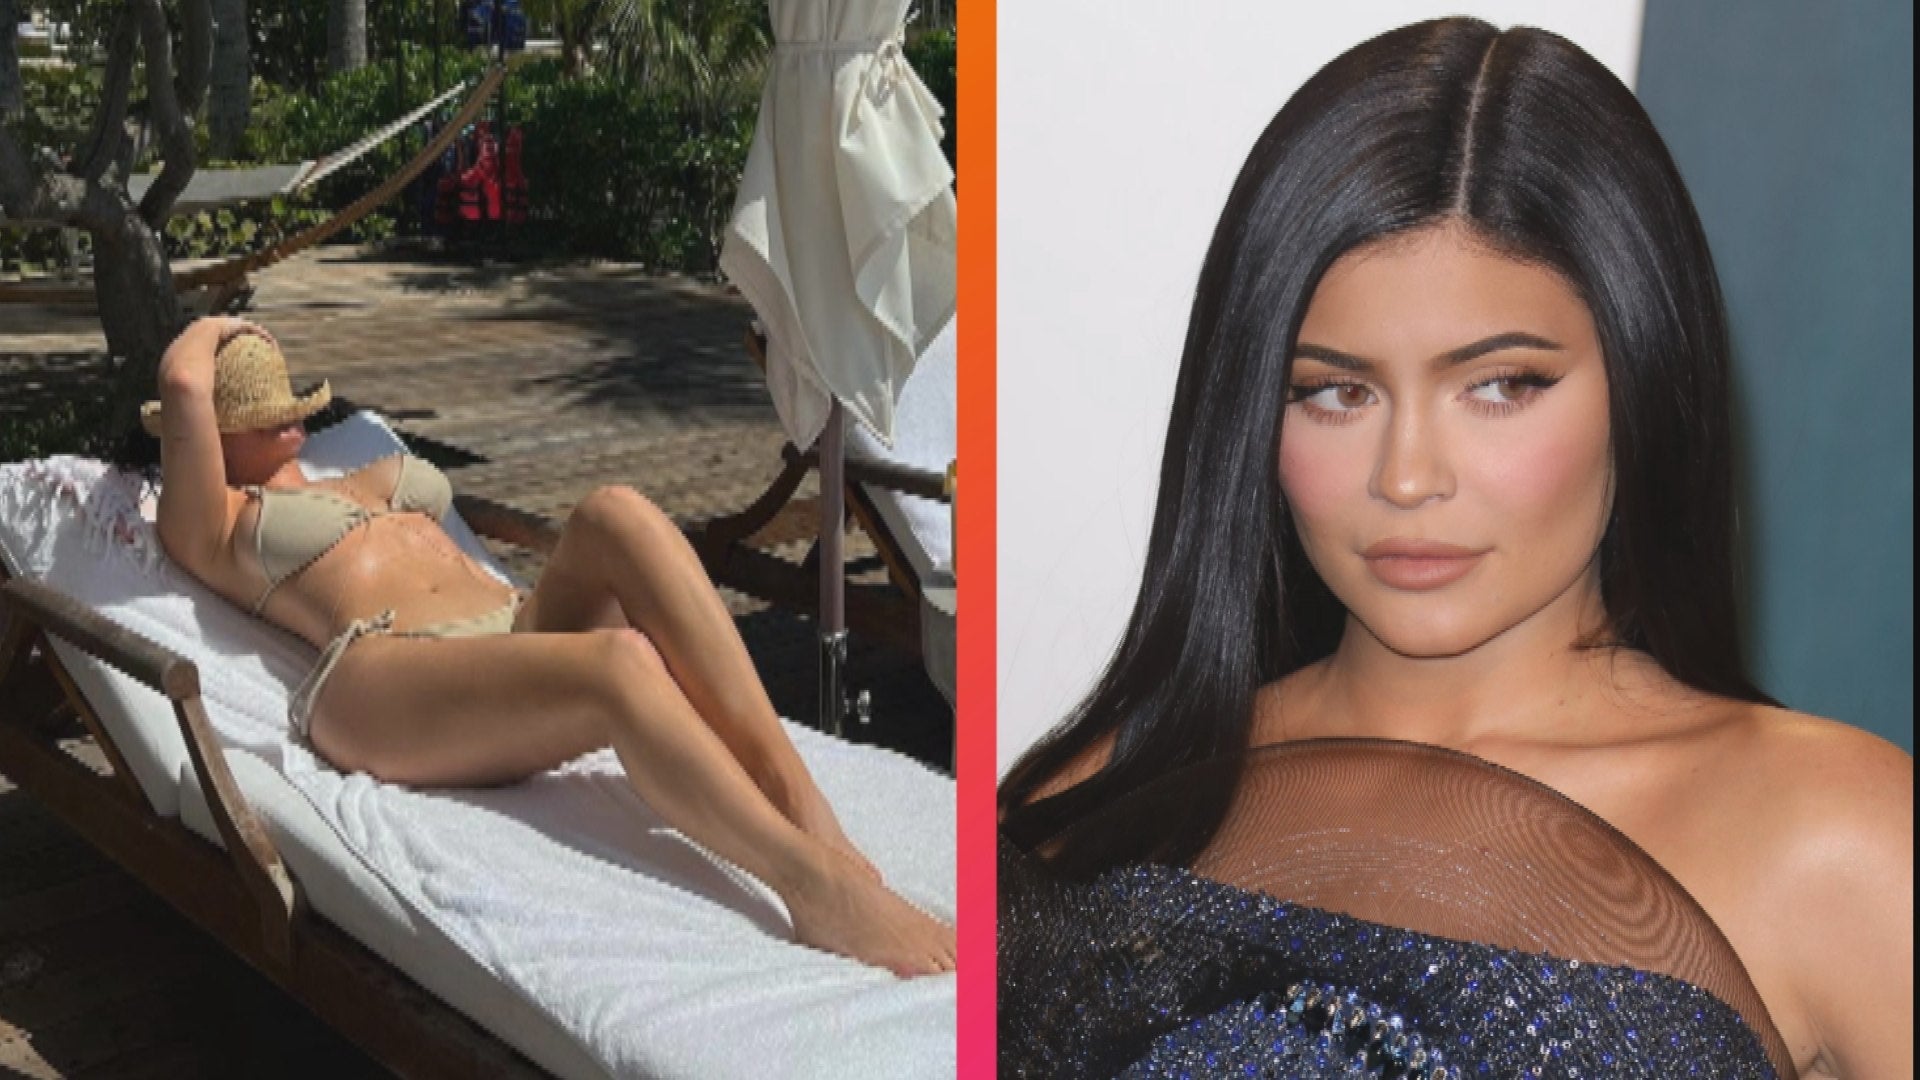 Kylie Jenner Rocks Bikini After Revealing She Gained 60 Pounds During Pregnancy pic